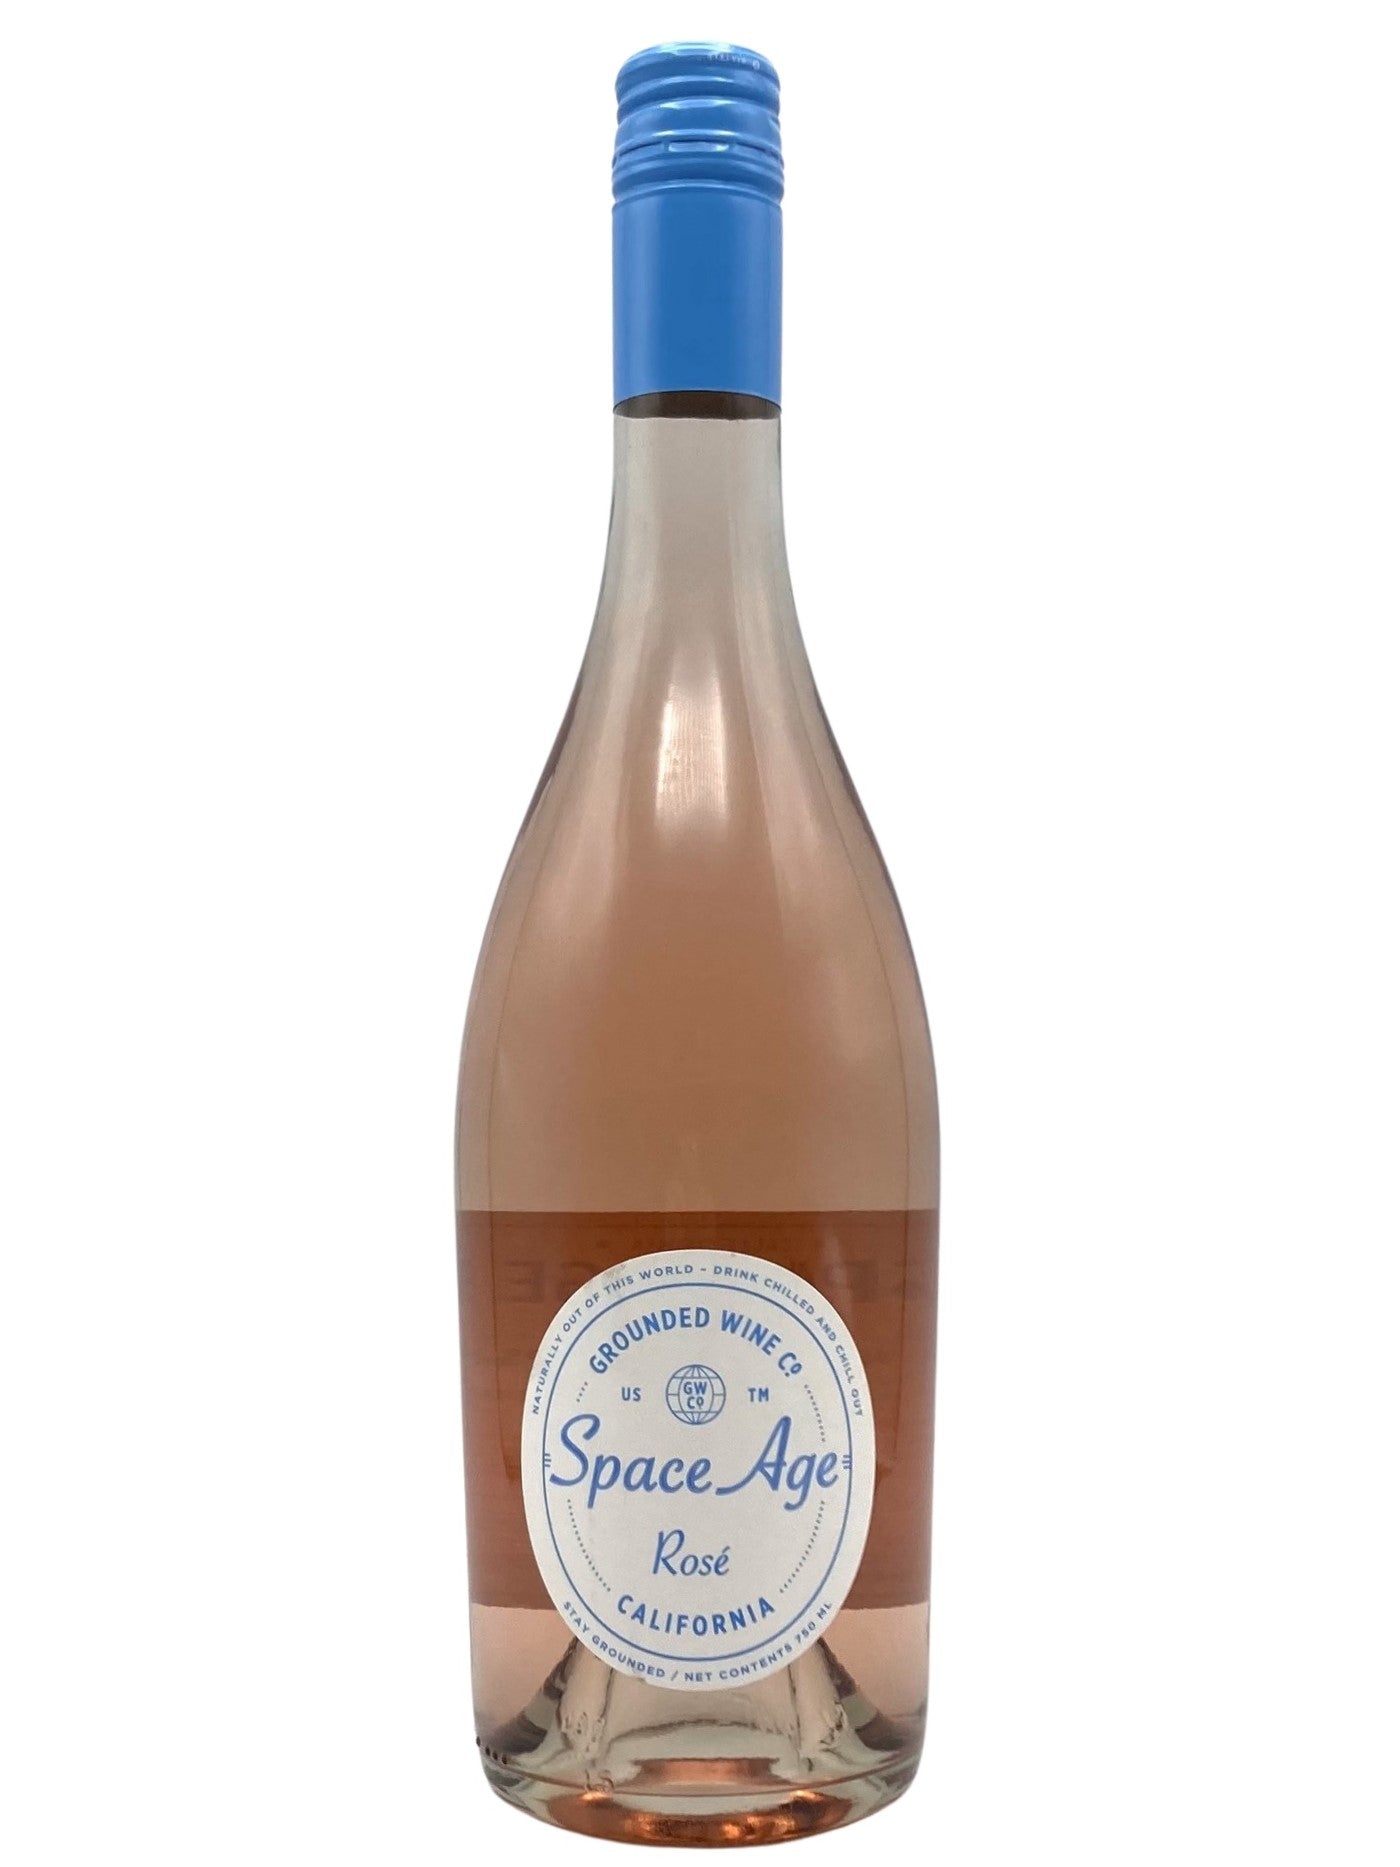 Grounded Wine Co. Space Age Rose